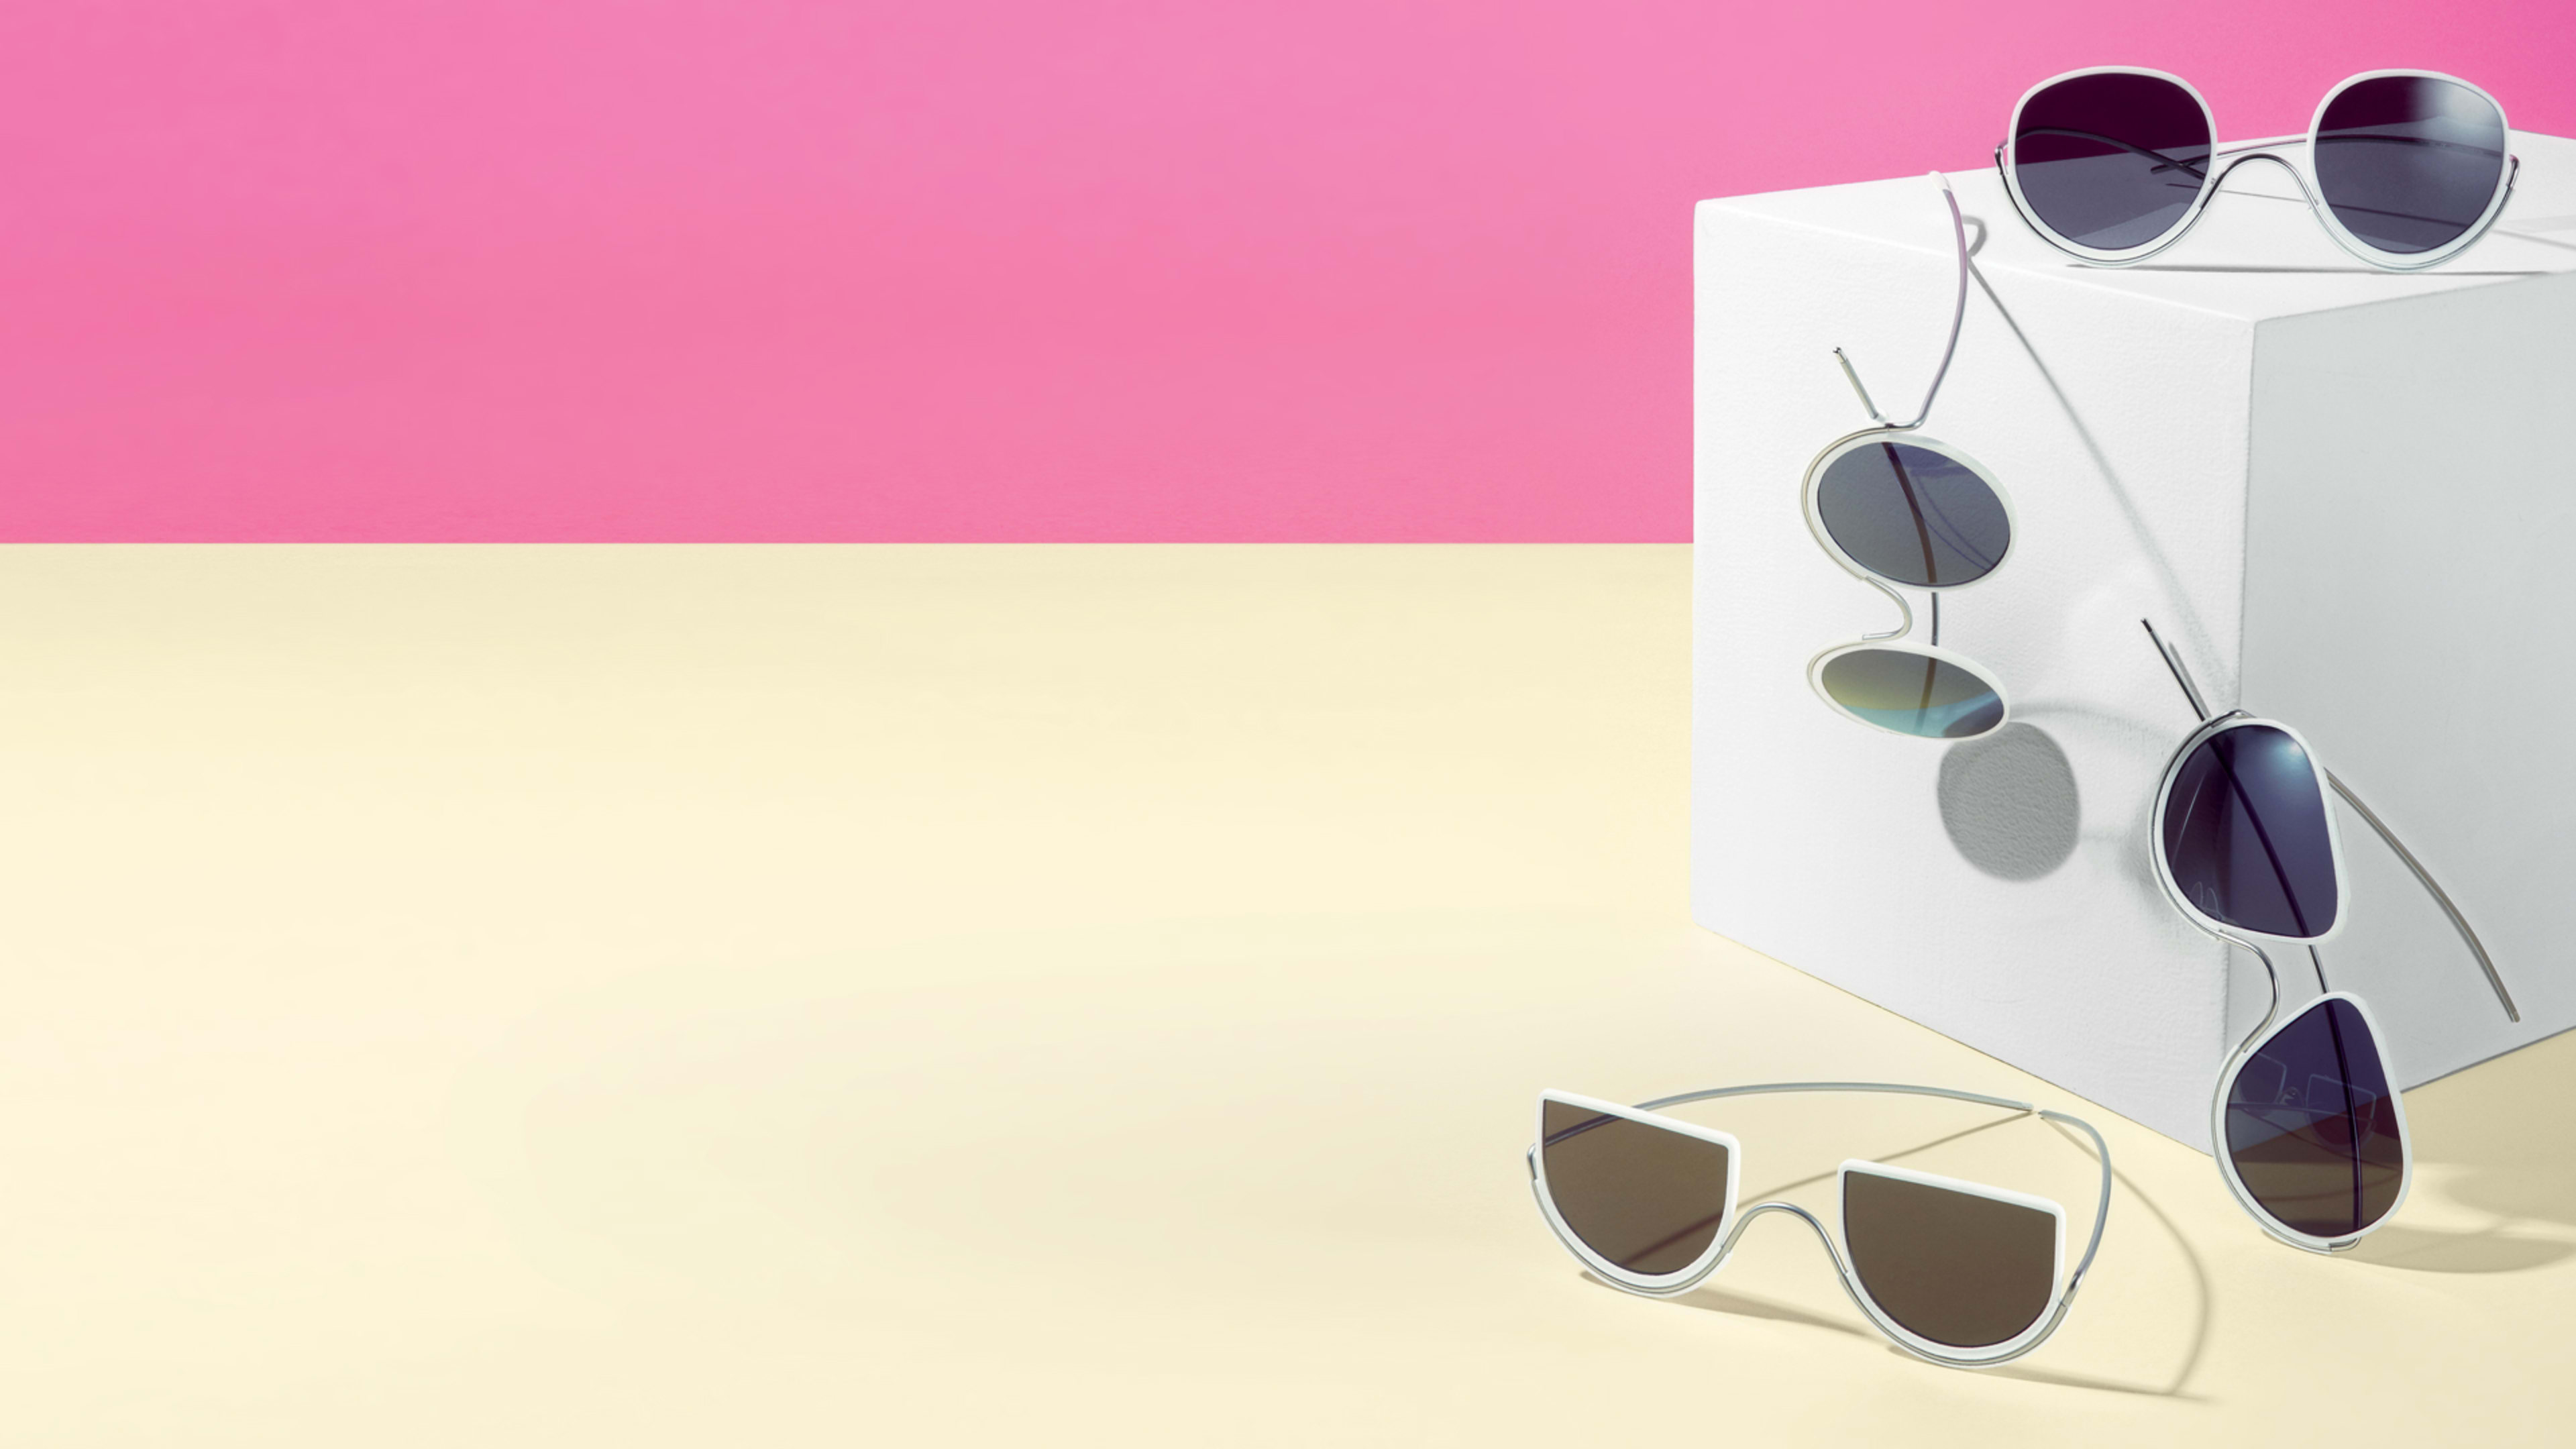 Eco-friendly, 3D-printed modular sunglasses? Yes, please